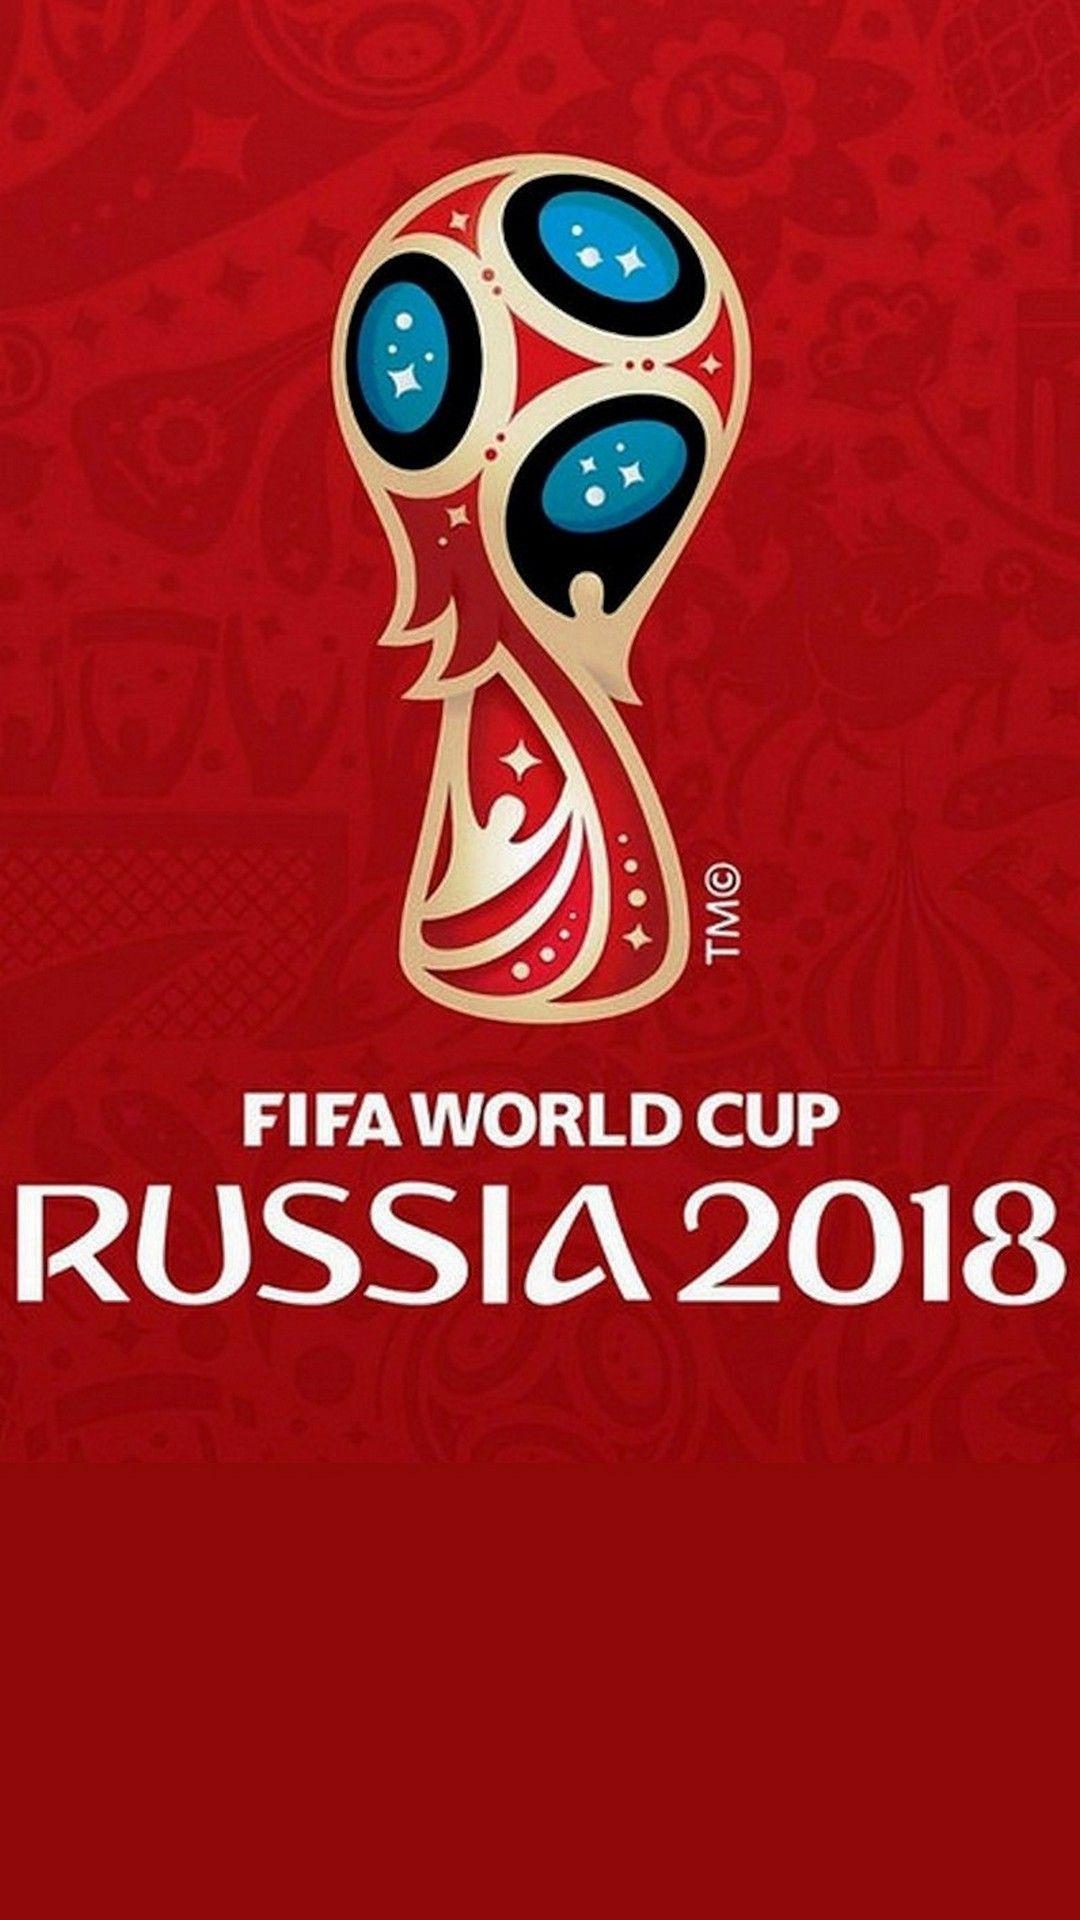 World Cup Wallpaper Android Android Wallpaper. World